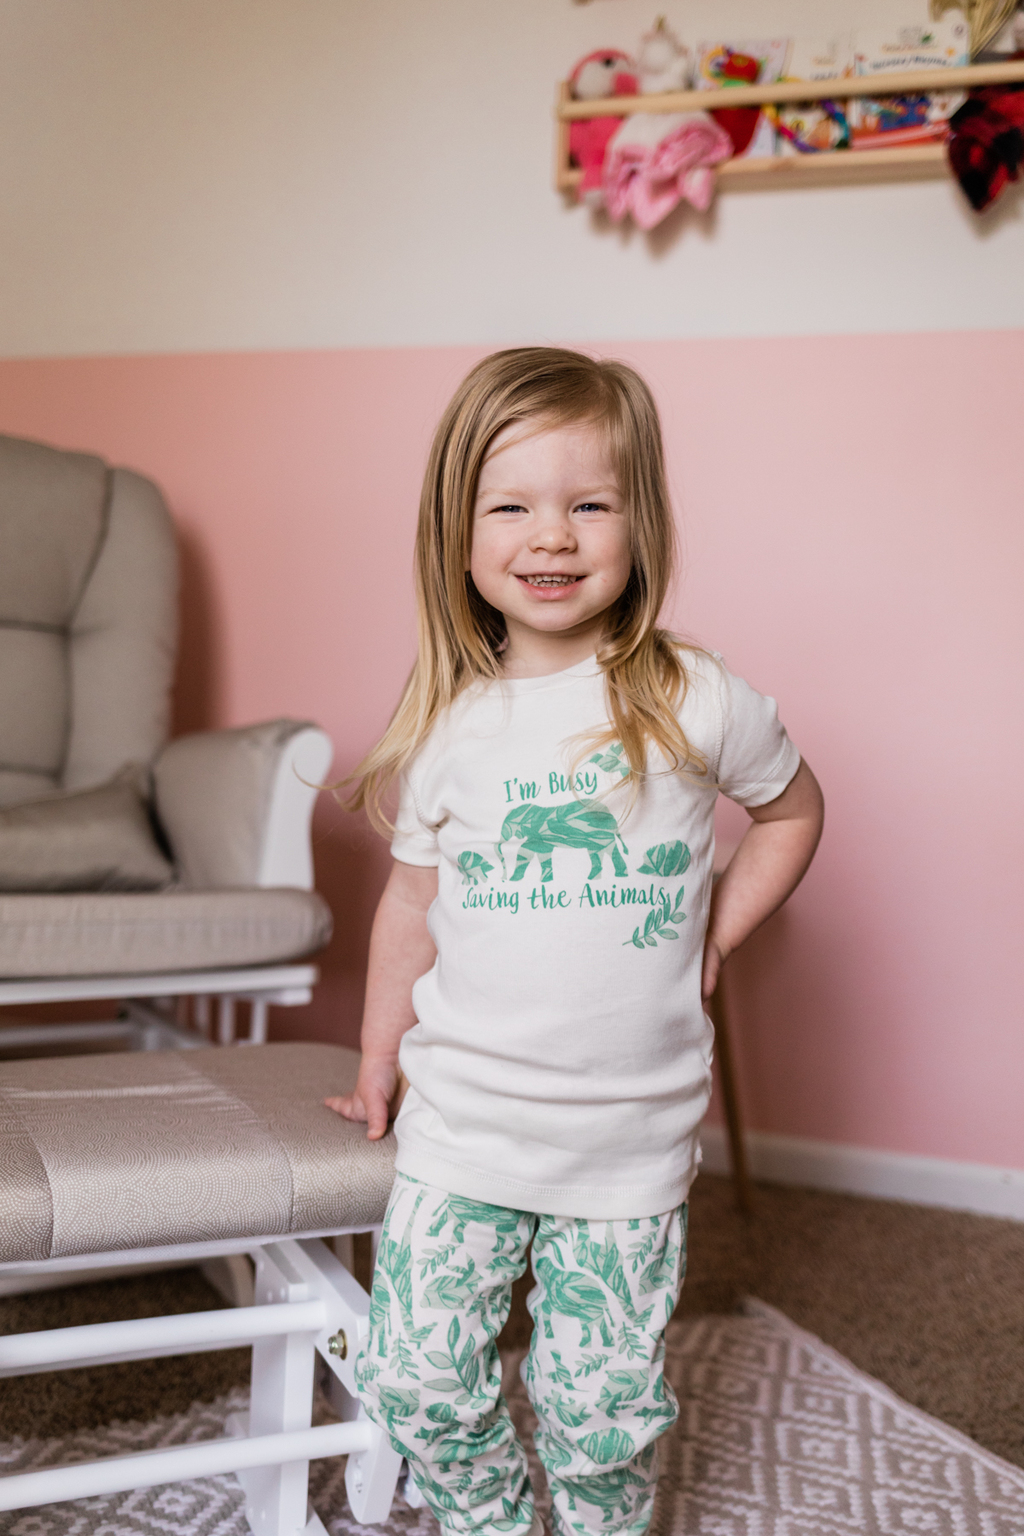 15 Awesome Kids Clothes For Summer 2021